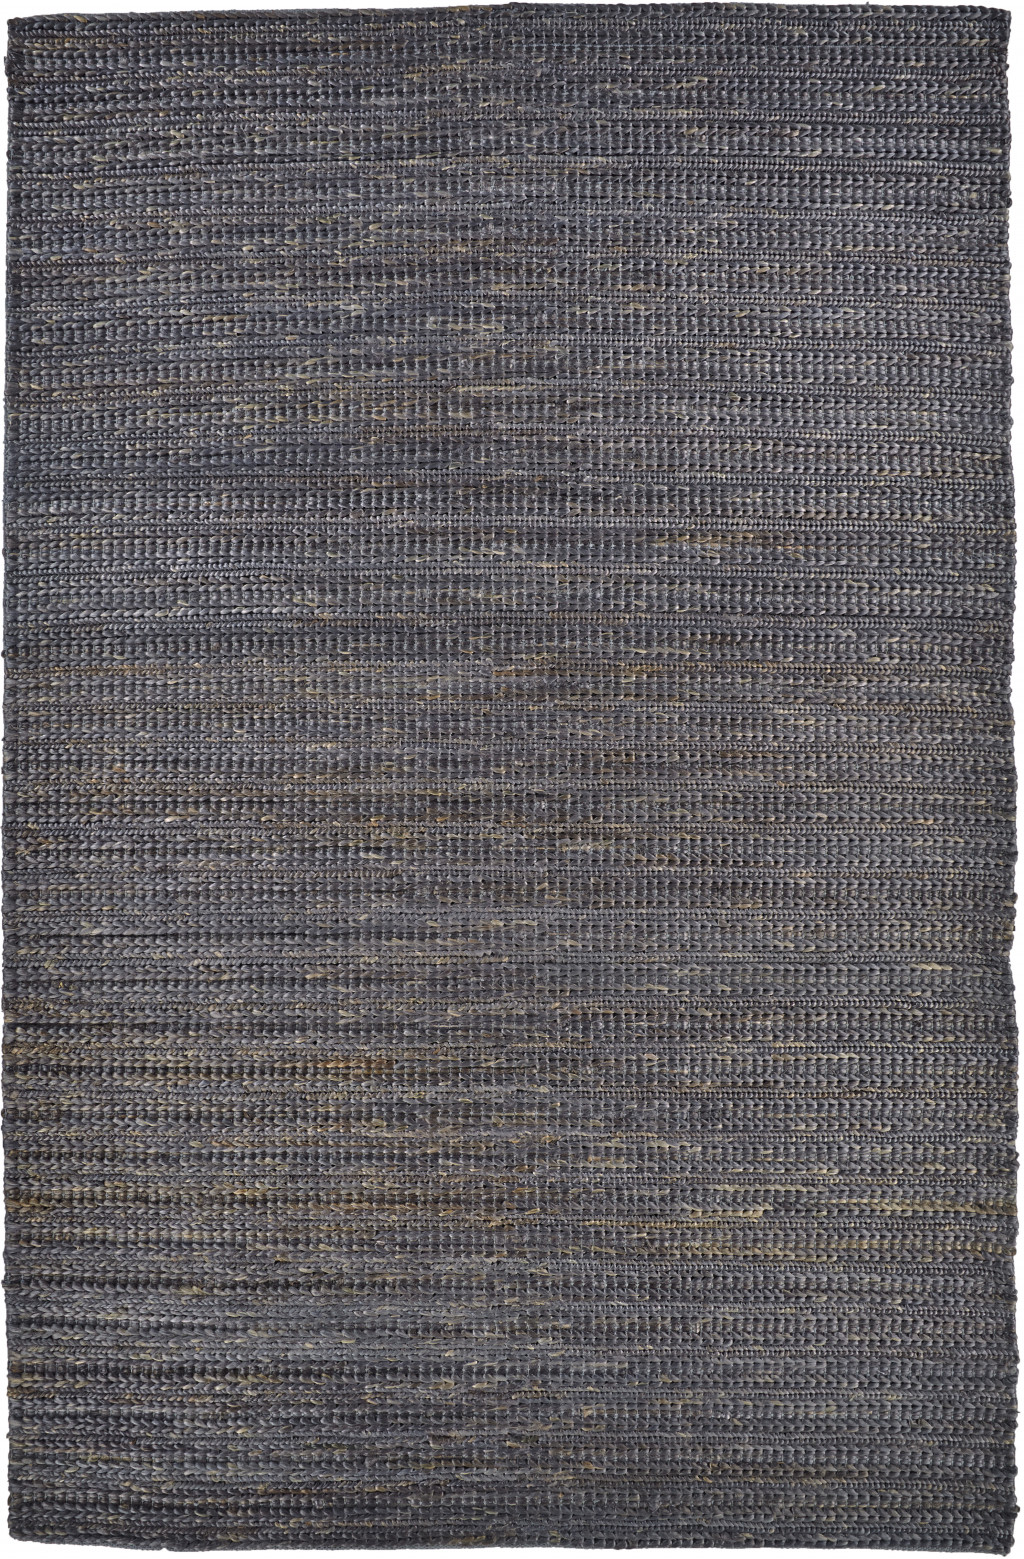 10' X 13' Brown Blue And Taupe Hand Woven Area Rug-511428-1